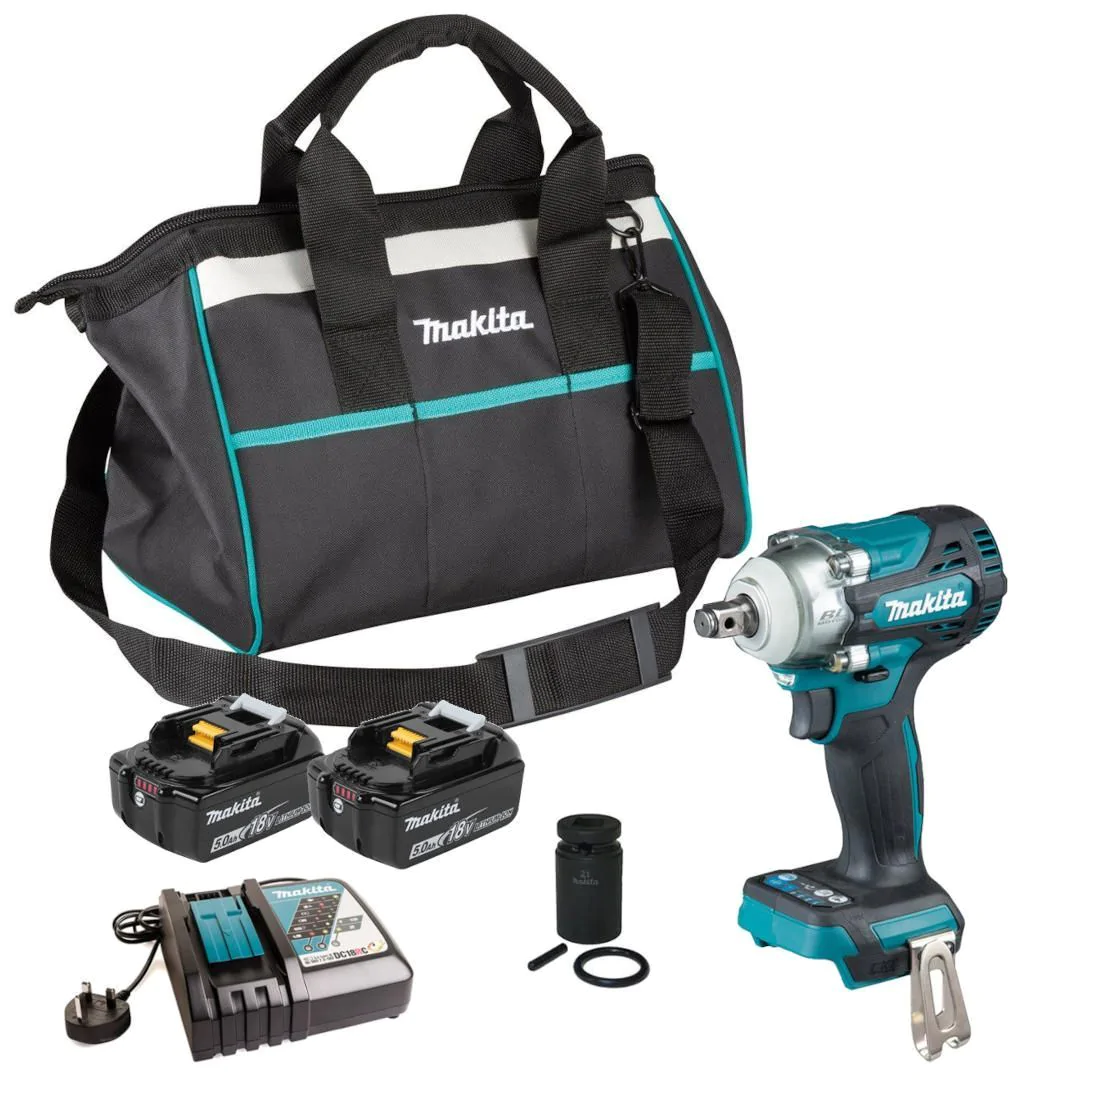 New Makita Drill now available